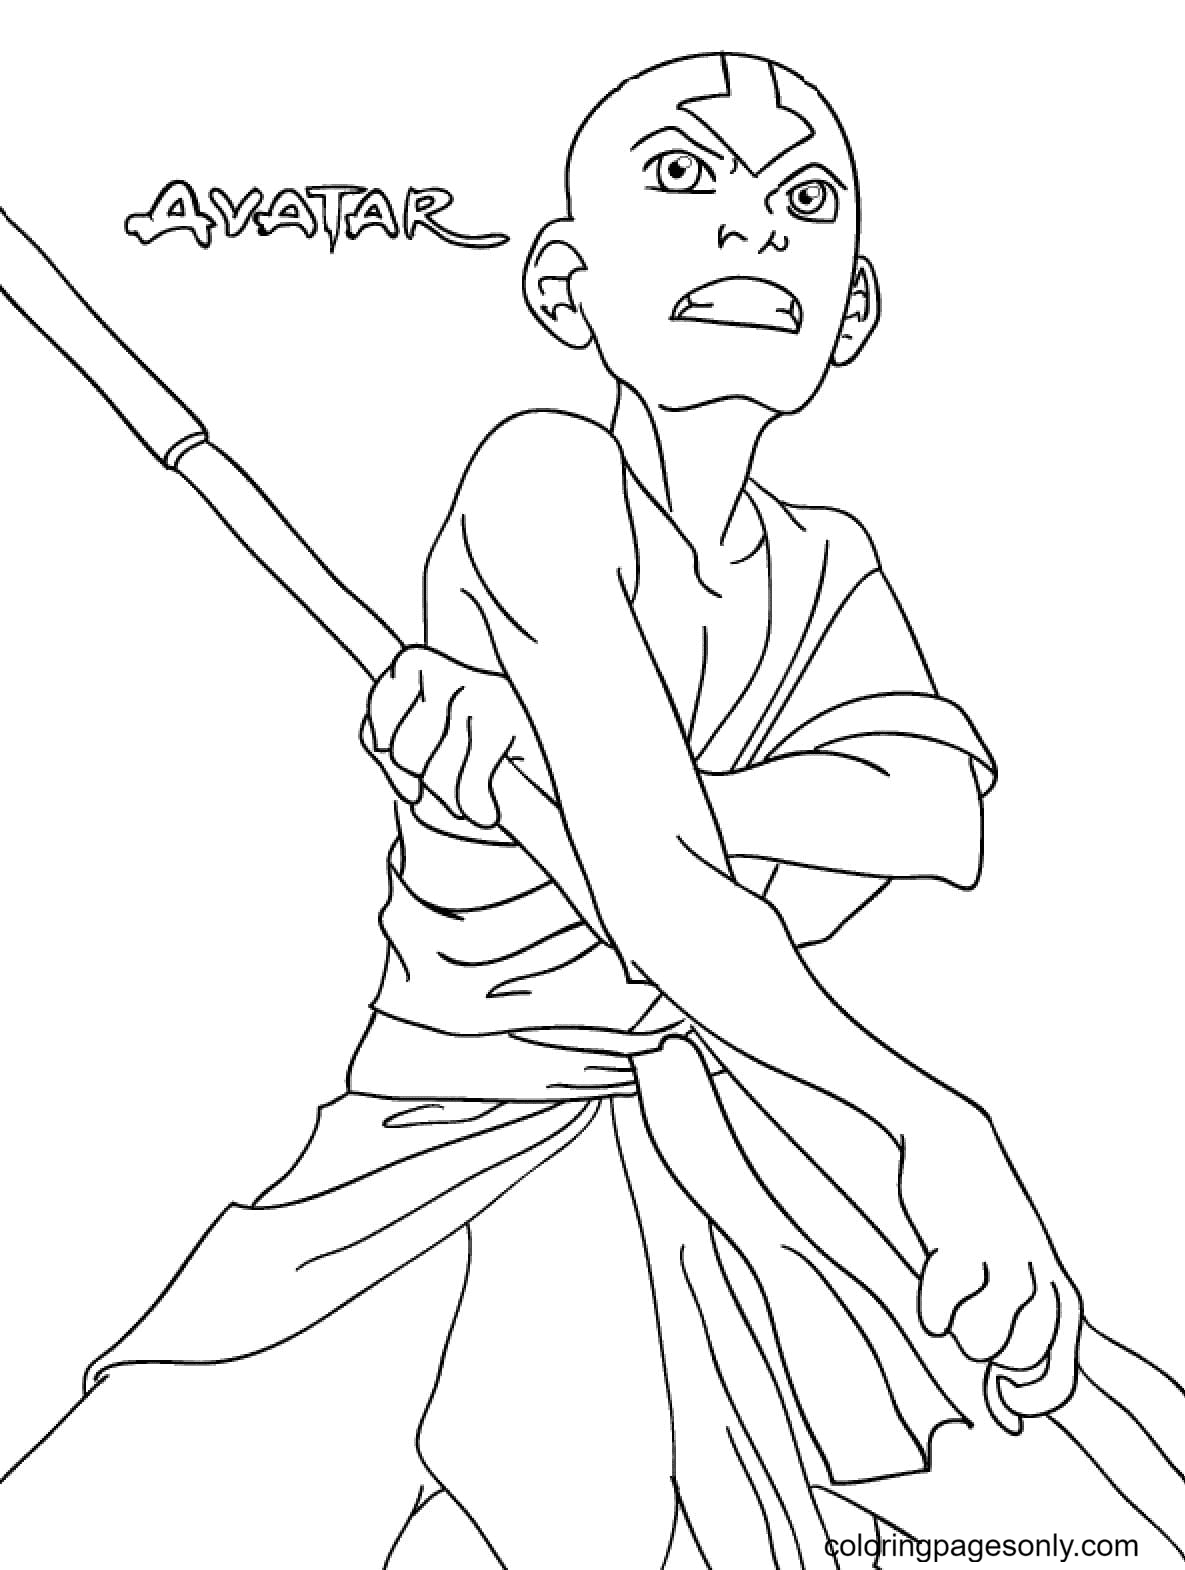 Aang from Avatar Coloring Page